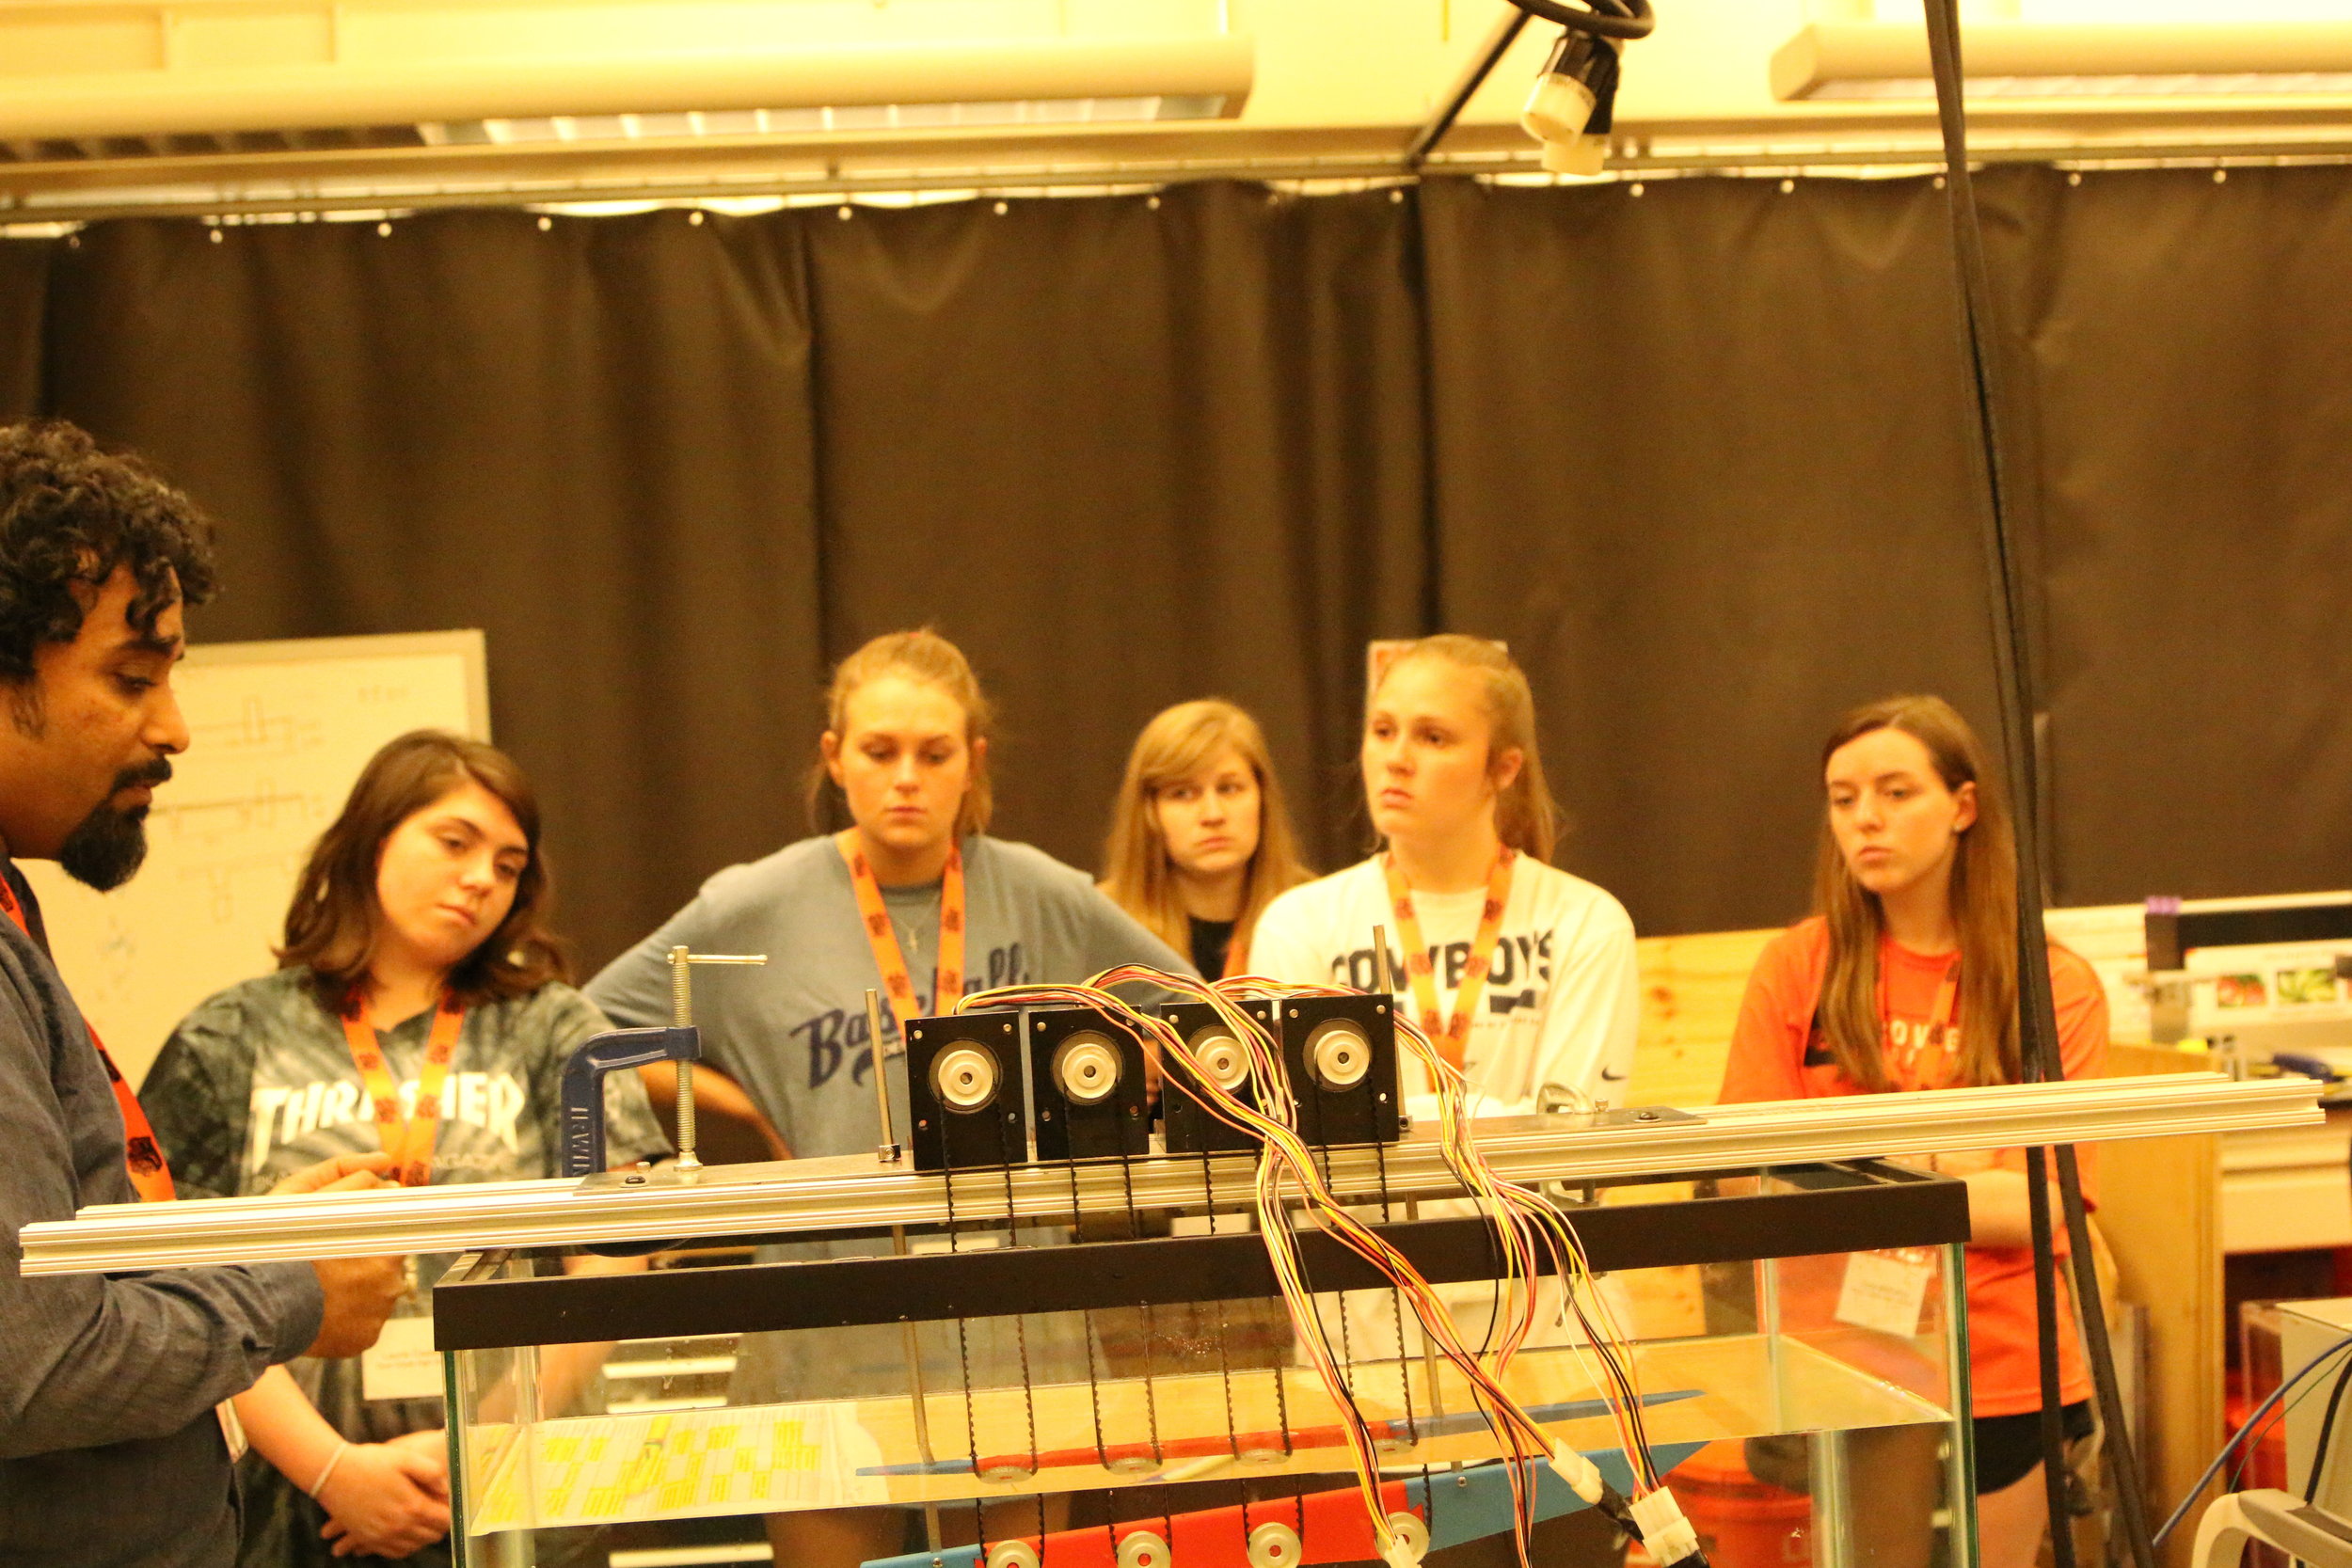  Students watching a demonstration of the “krillbot” 